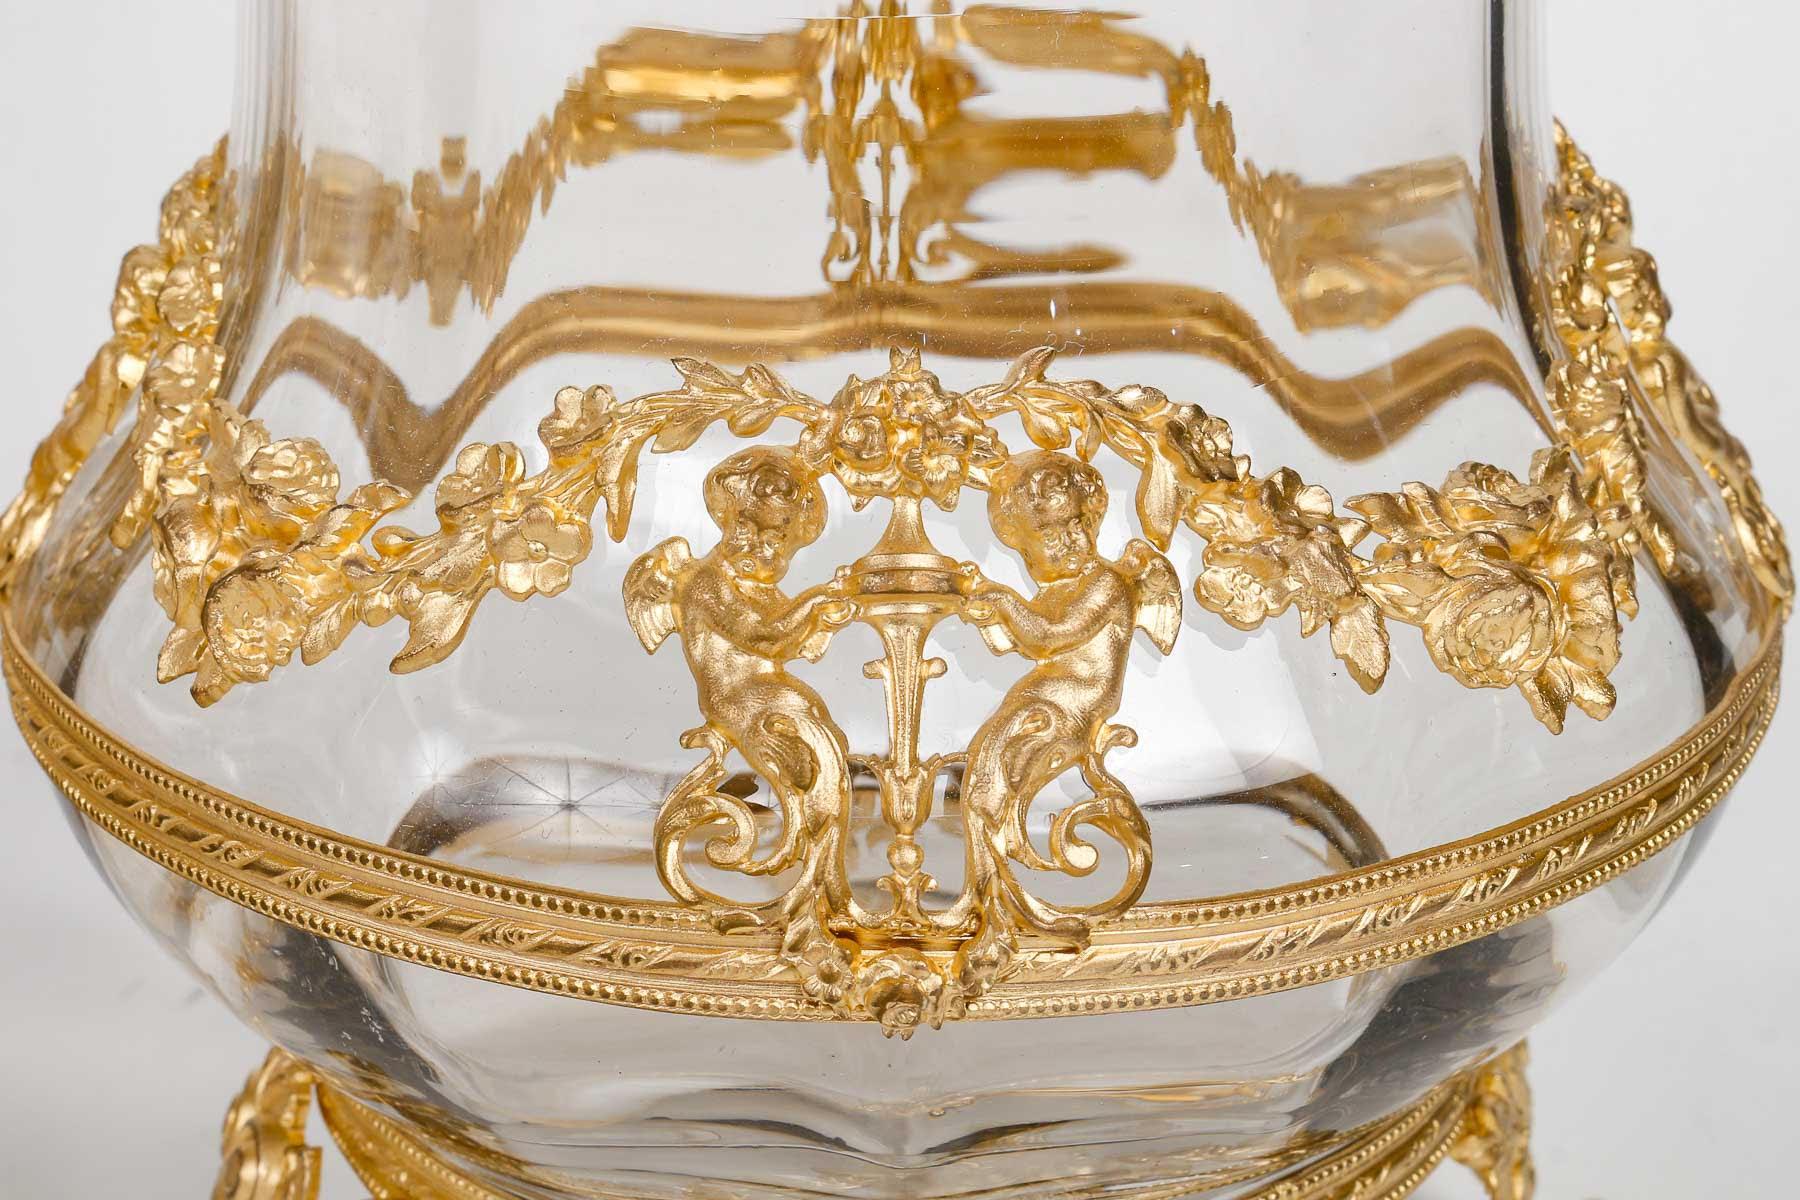 Baccarat Crystal Decoration, Chased and Gilded Bronze Mounting, 19th Century.  1